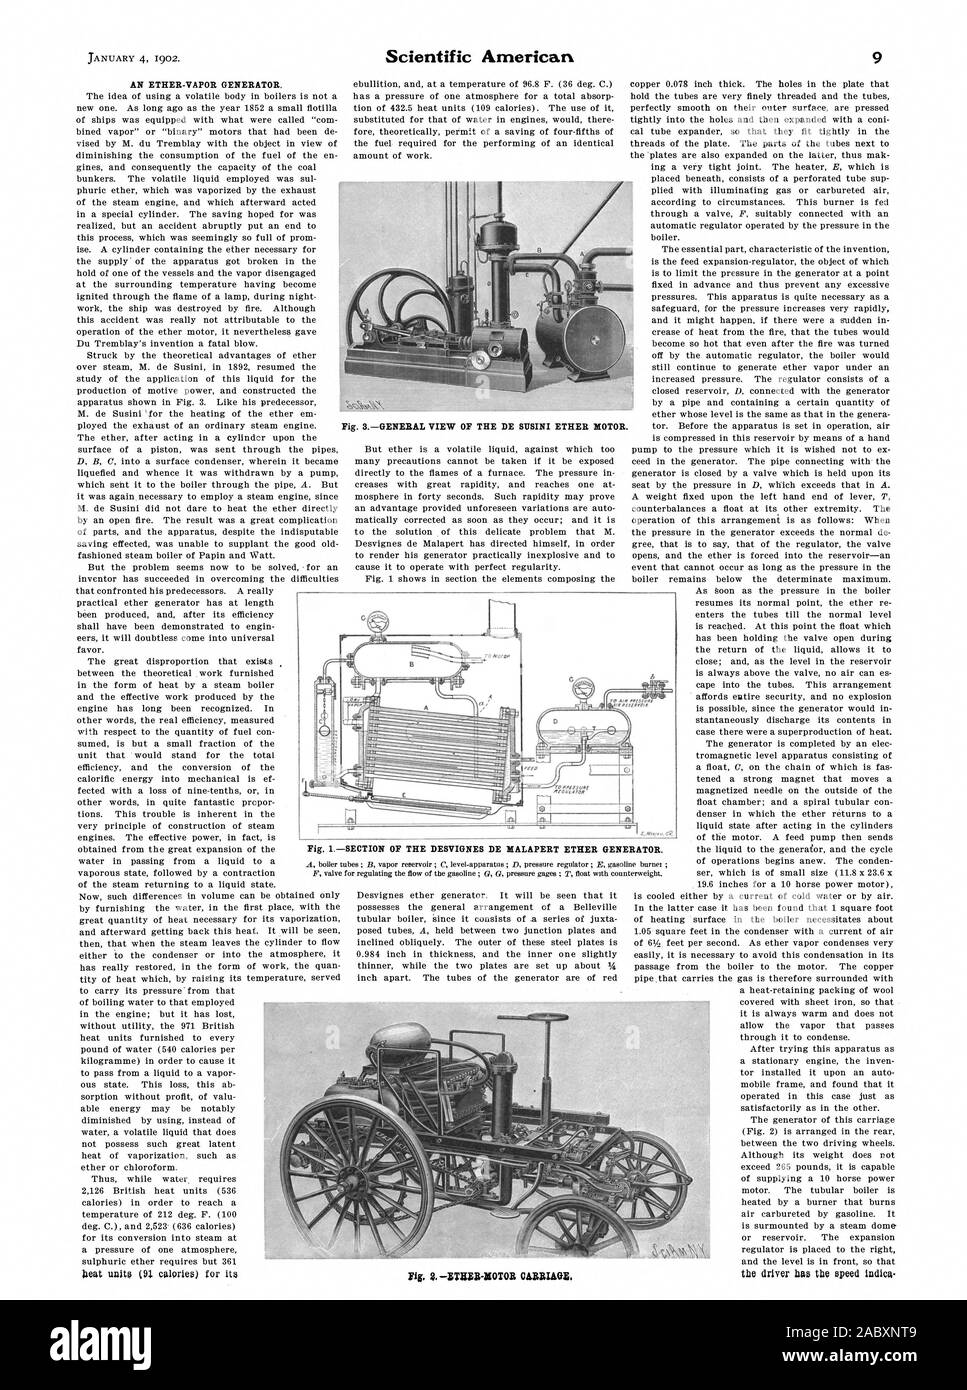 AN ETHER-VAPOR GENERATOR. Fig. SGENERAL VIEW OF THE DE BIMINI ETHER MOTOR. Fig. ISECTION OF THE DESVIGNES DE MALAPERT ETHER GENERATOR., scientific american, 1902-01-04 Stock Photo